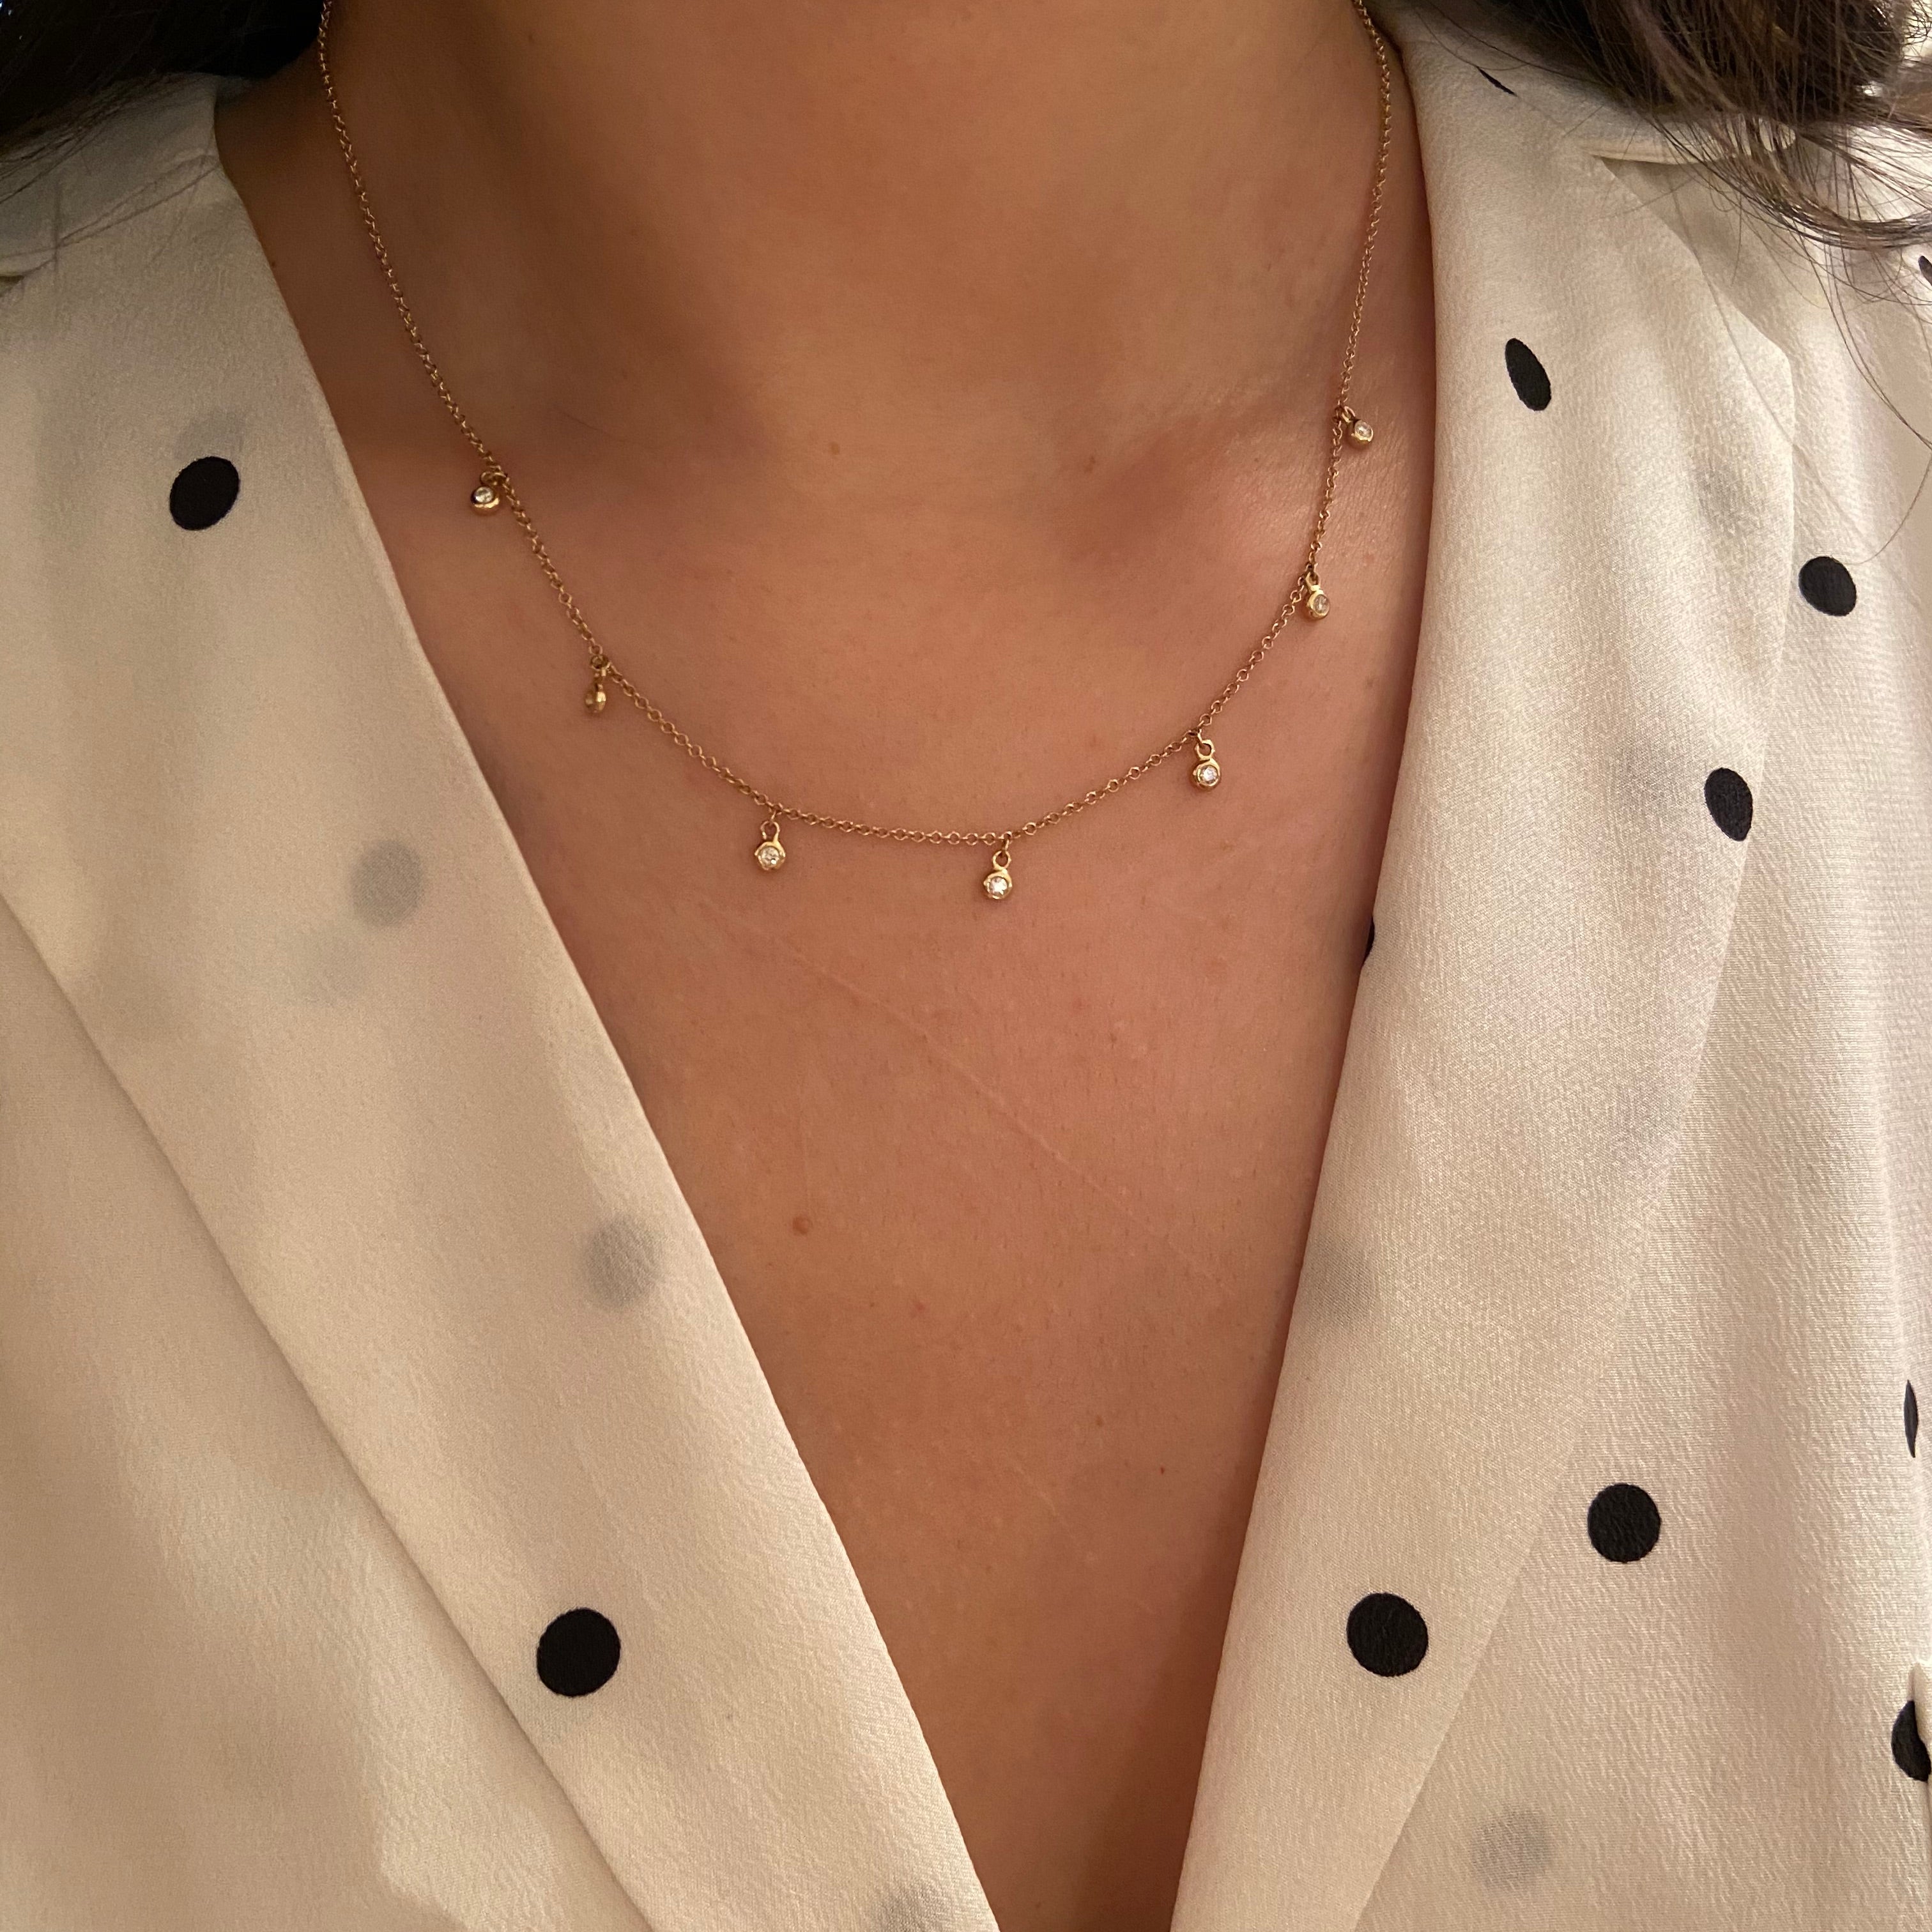 Buy Delicate Silver Choker, Sterling Silver Collar Necklace, Choker Necklace,  Layering Necklace, Minimal Silver Necklace, 308 Online in India - Etsy